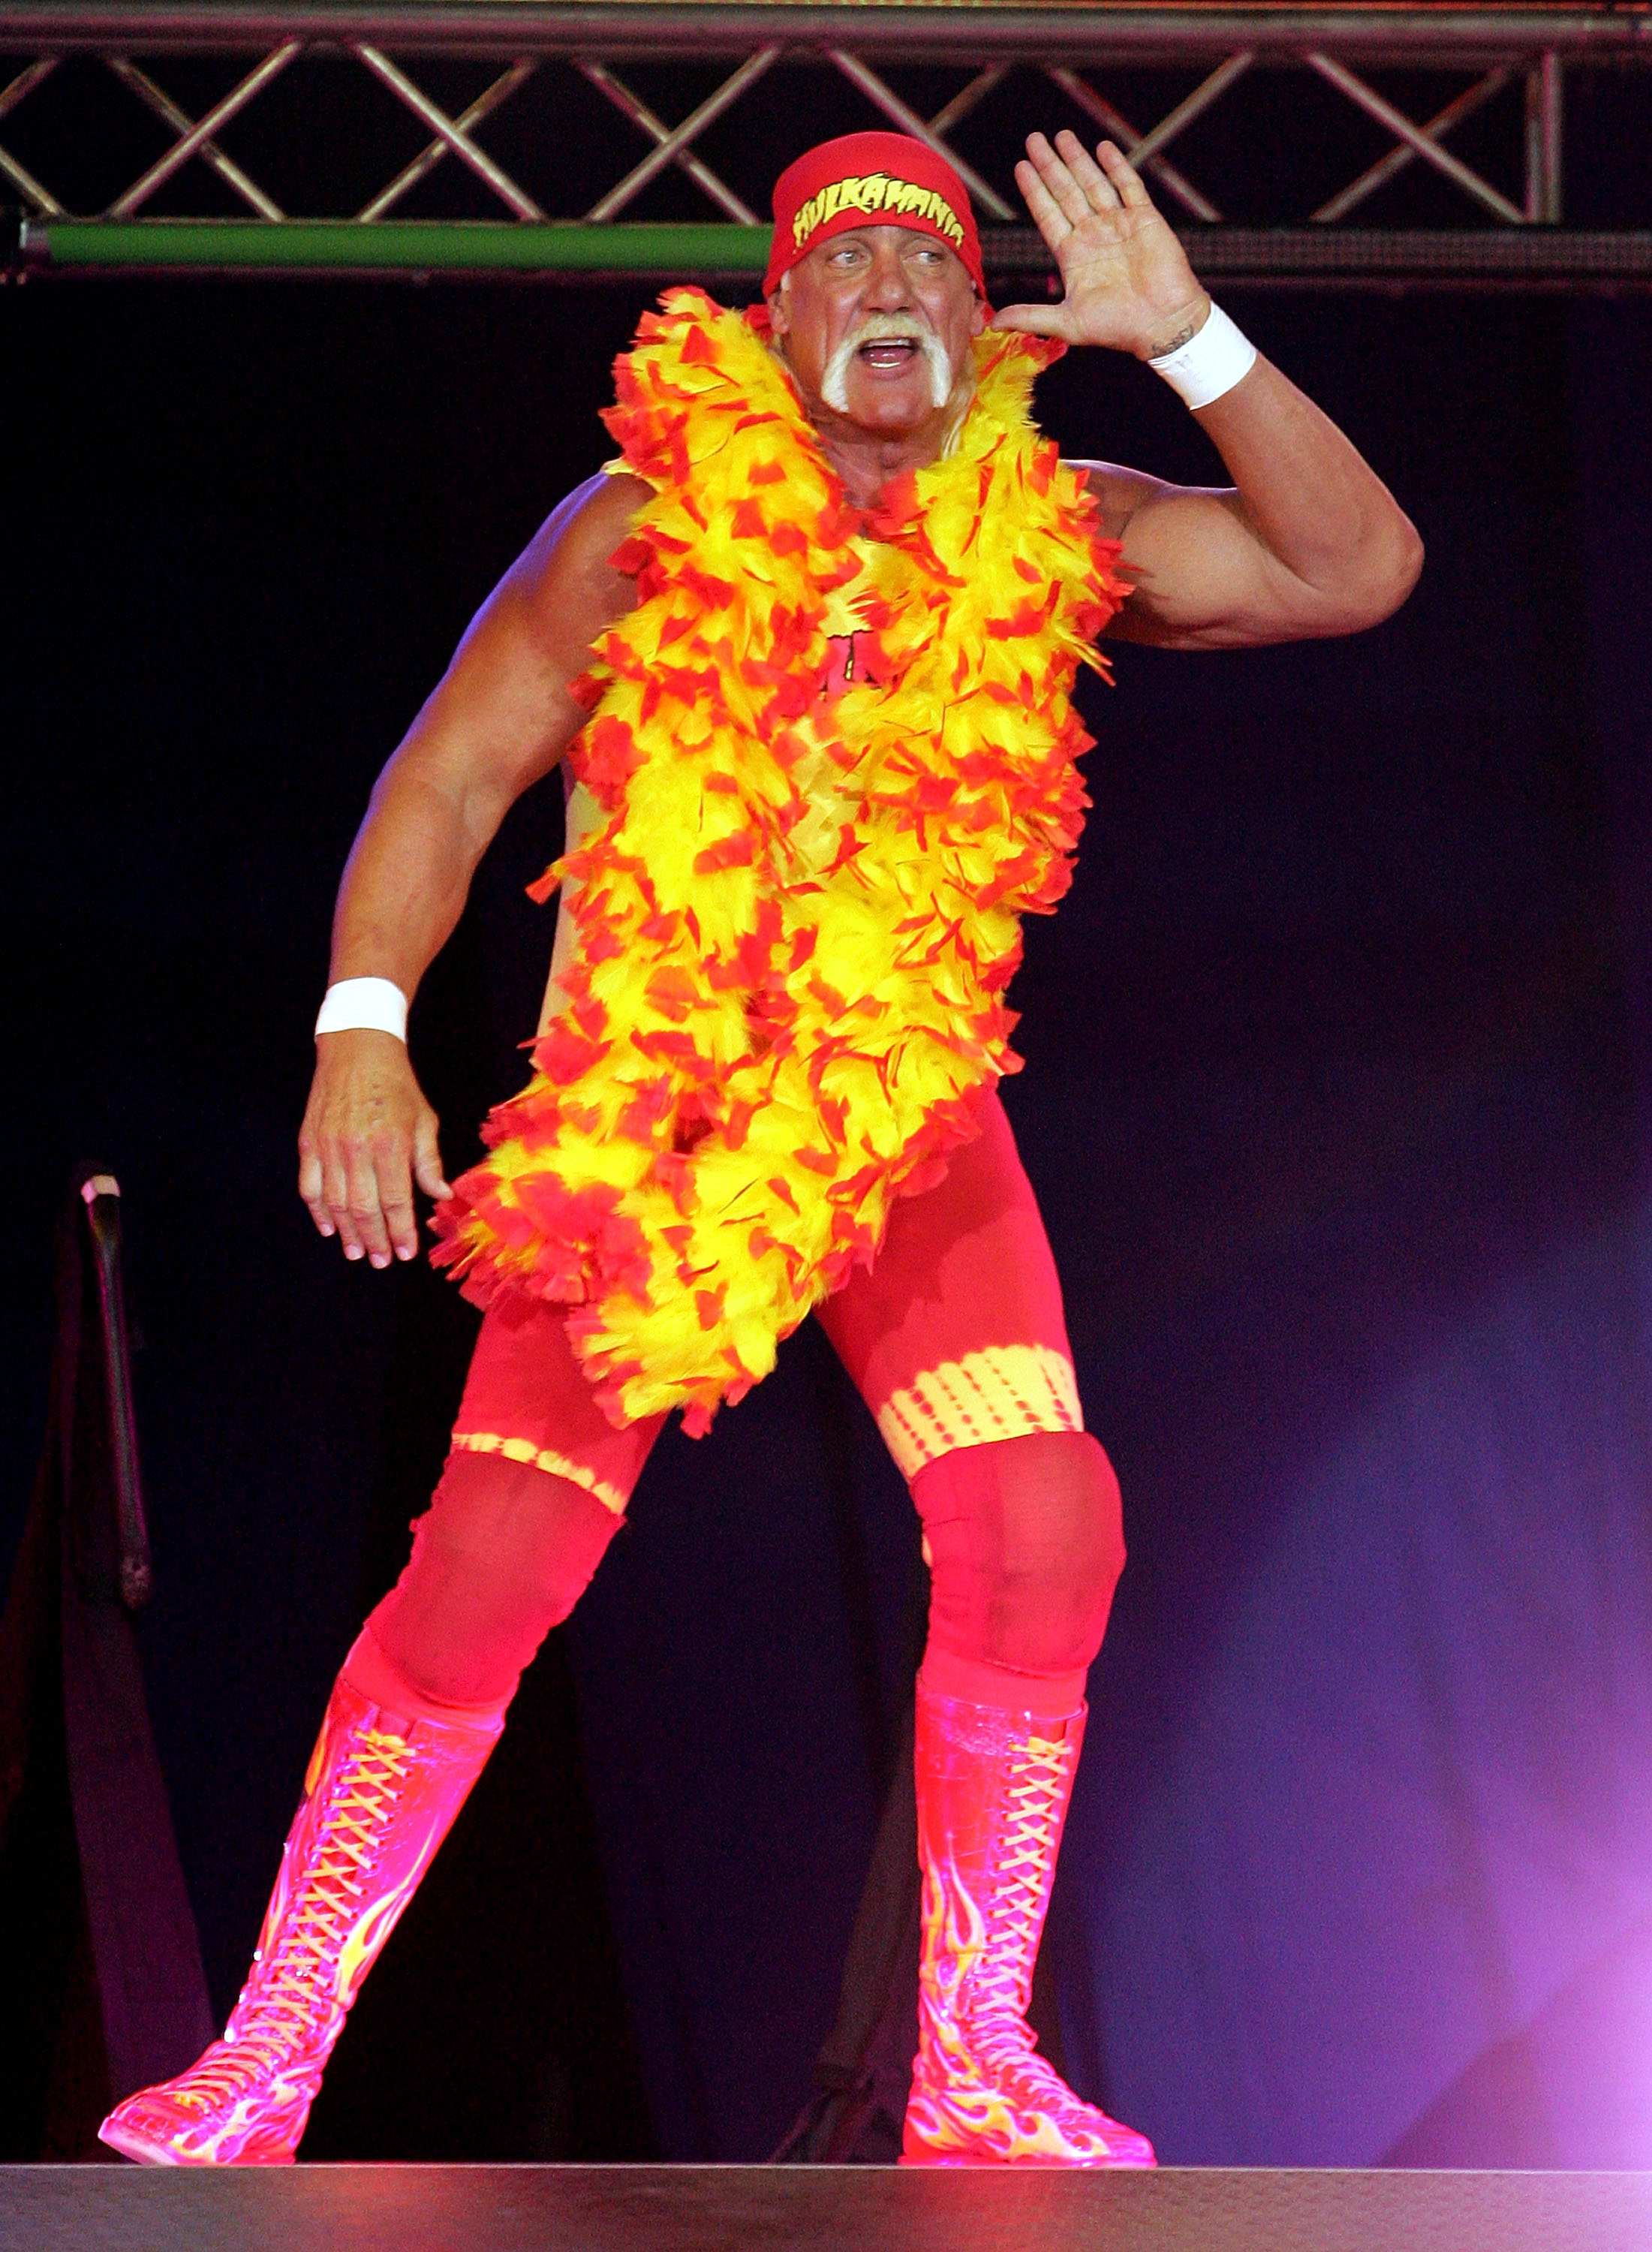 PERTH, AUSTRALIA - NOVEMBER 24:  Hulk Hogan enters the stage prior to his bout against Rick Flair during the Hulkamania Tour at the Burswood Dome on November 24, 2009 in Perth, Australia.  (Photo by Paul Kane/Getty Images)